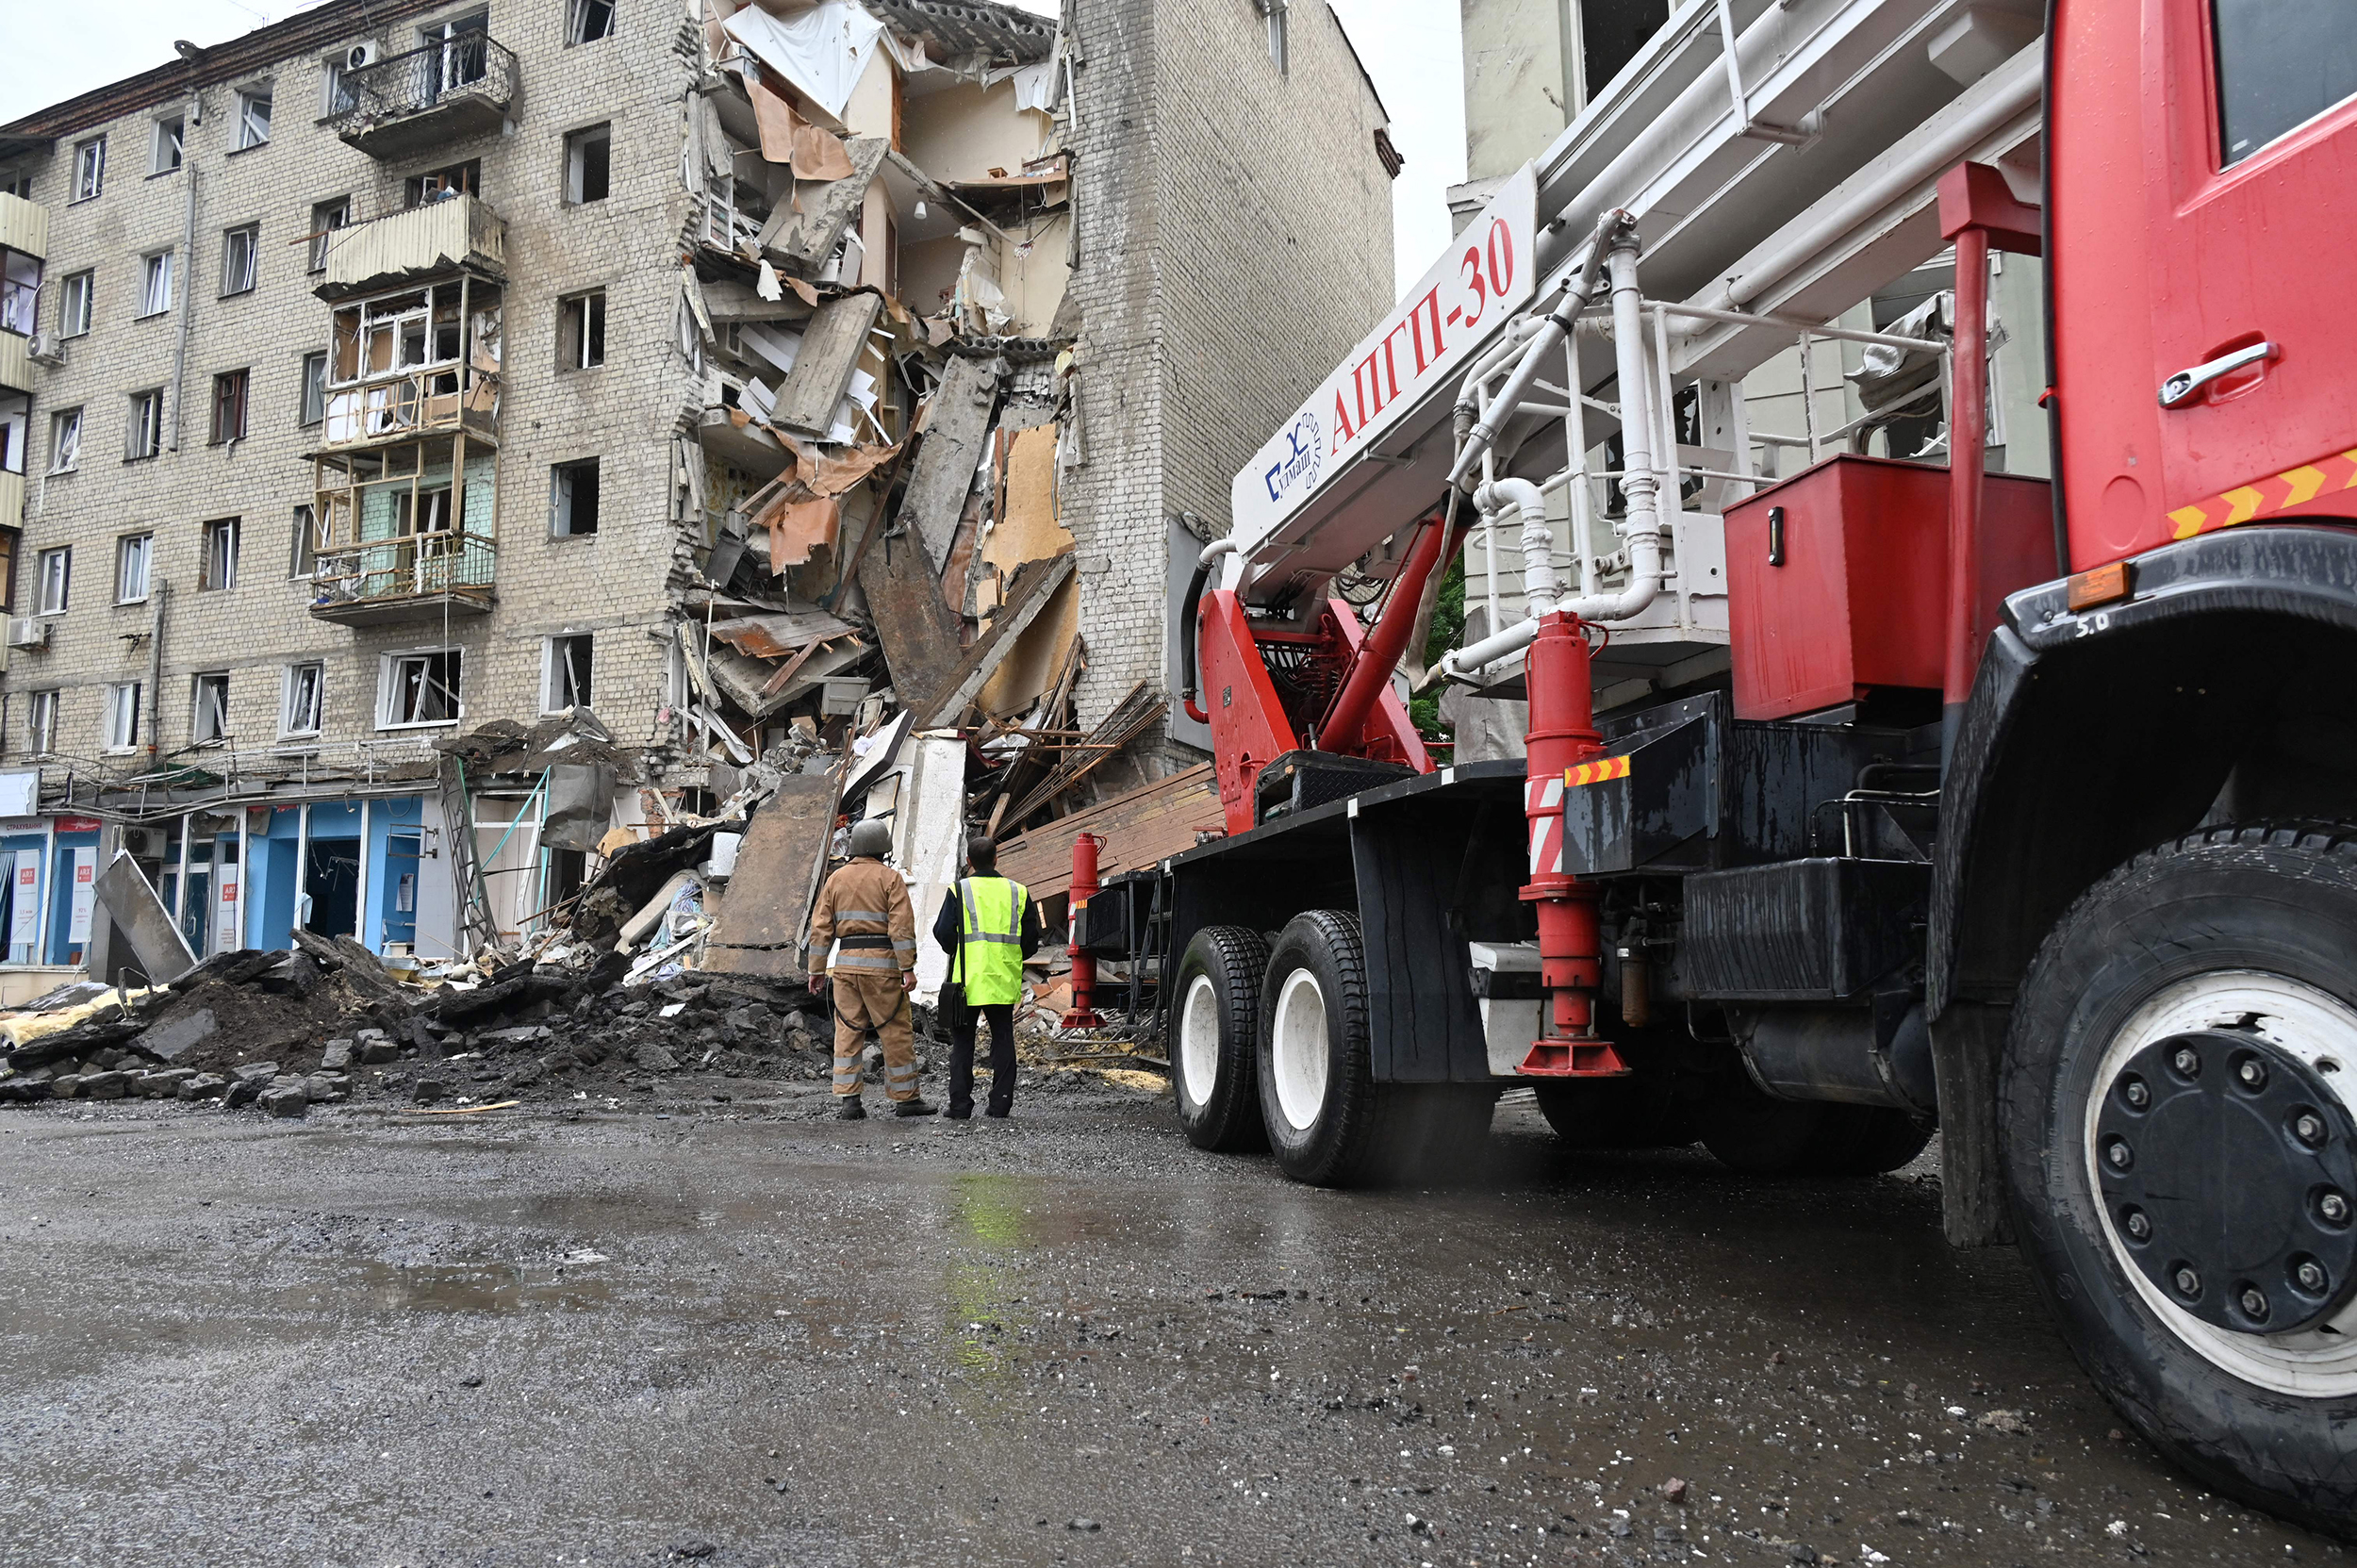 Ukrainian rescuers work outside a building partially destroyed after a missile strike in Kharkiv, Ukraine, on July 11.